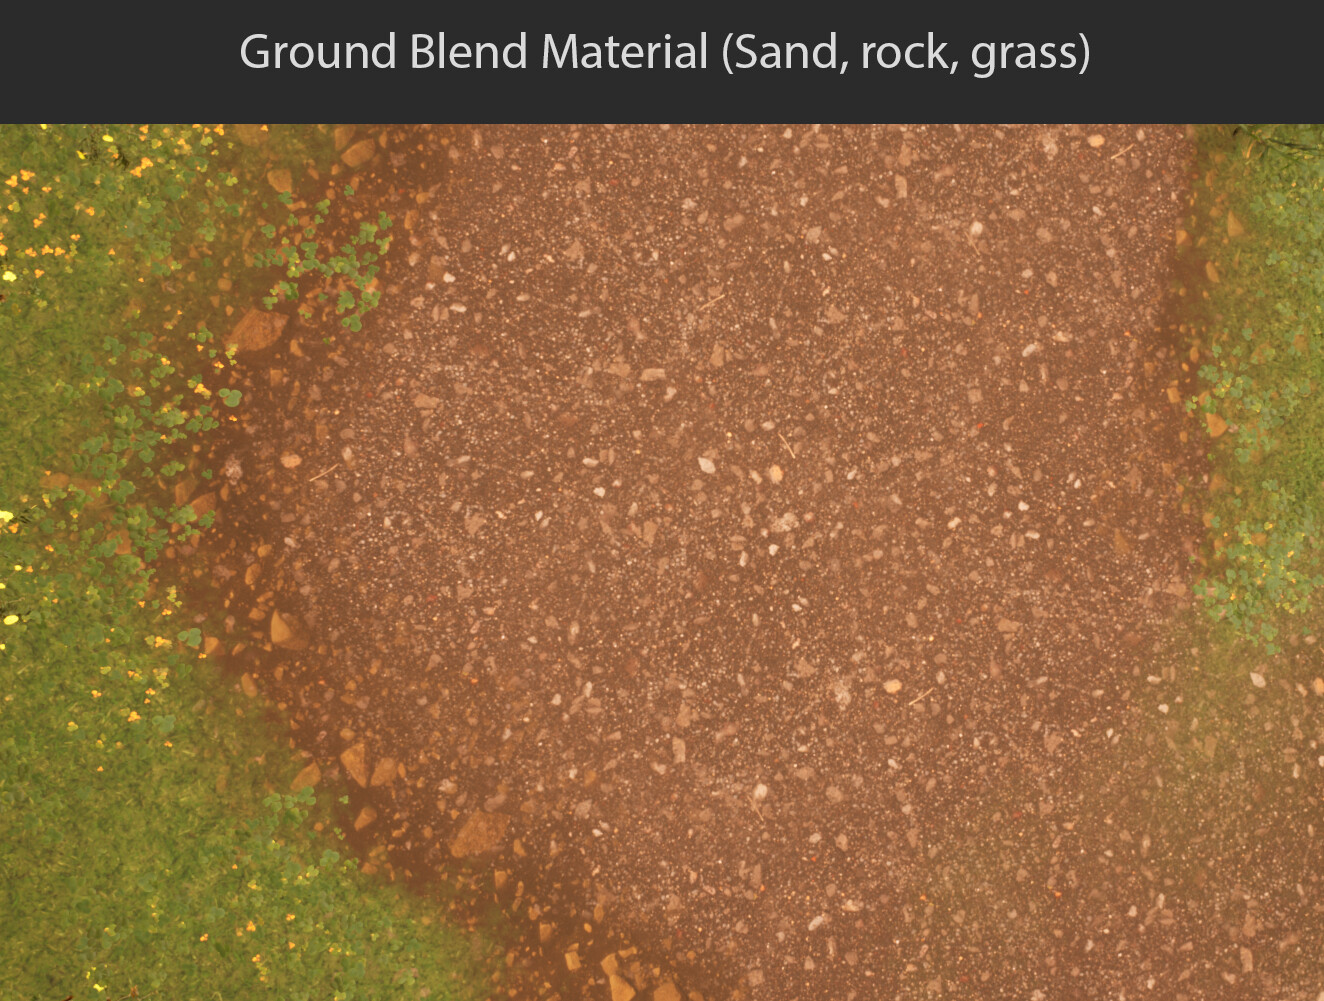 Ground Blend Material:

When painting between the 3 layers, it was important to use the rock layer to blend between the grass and sand.